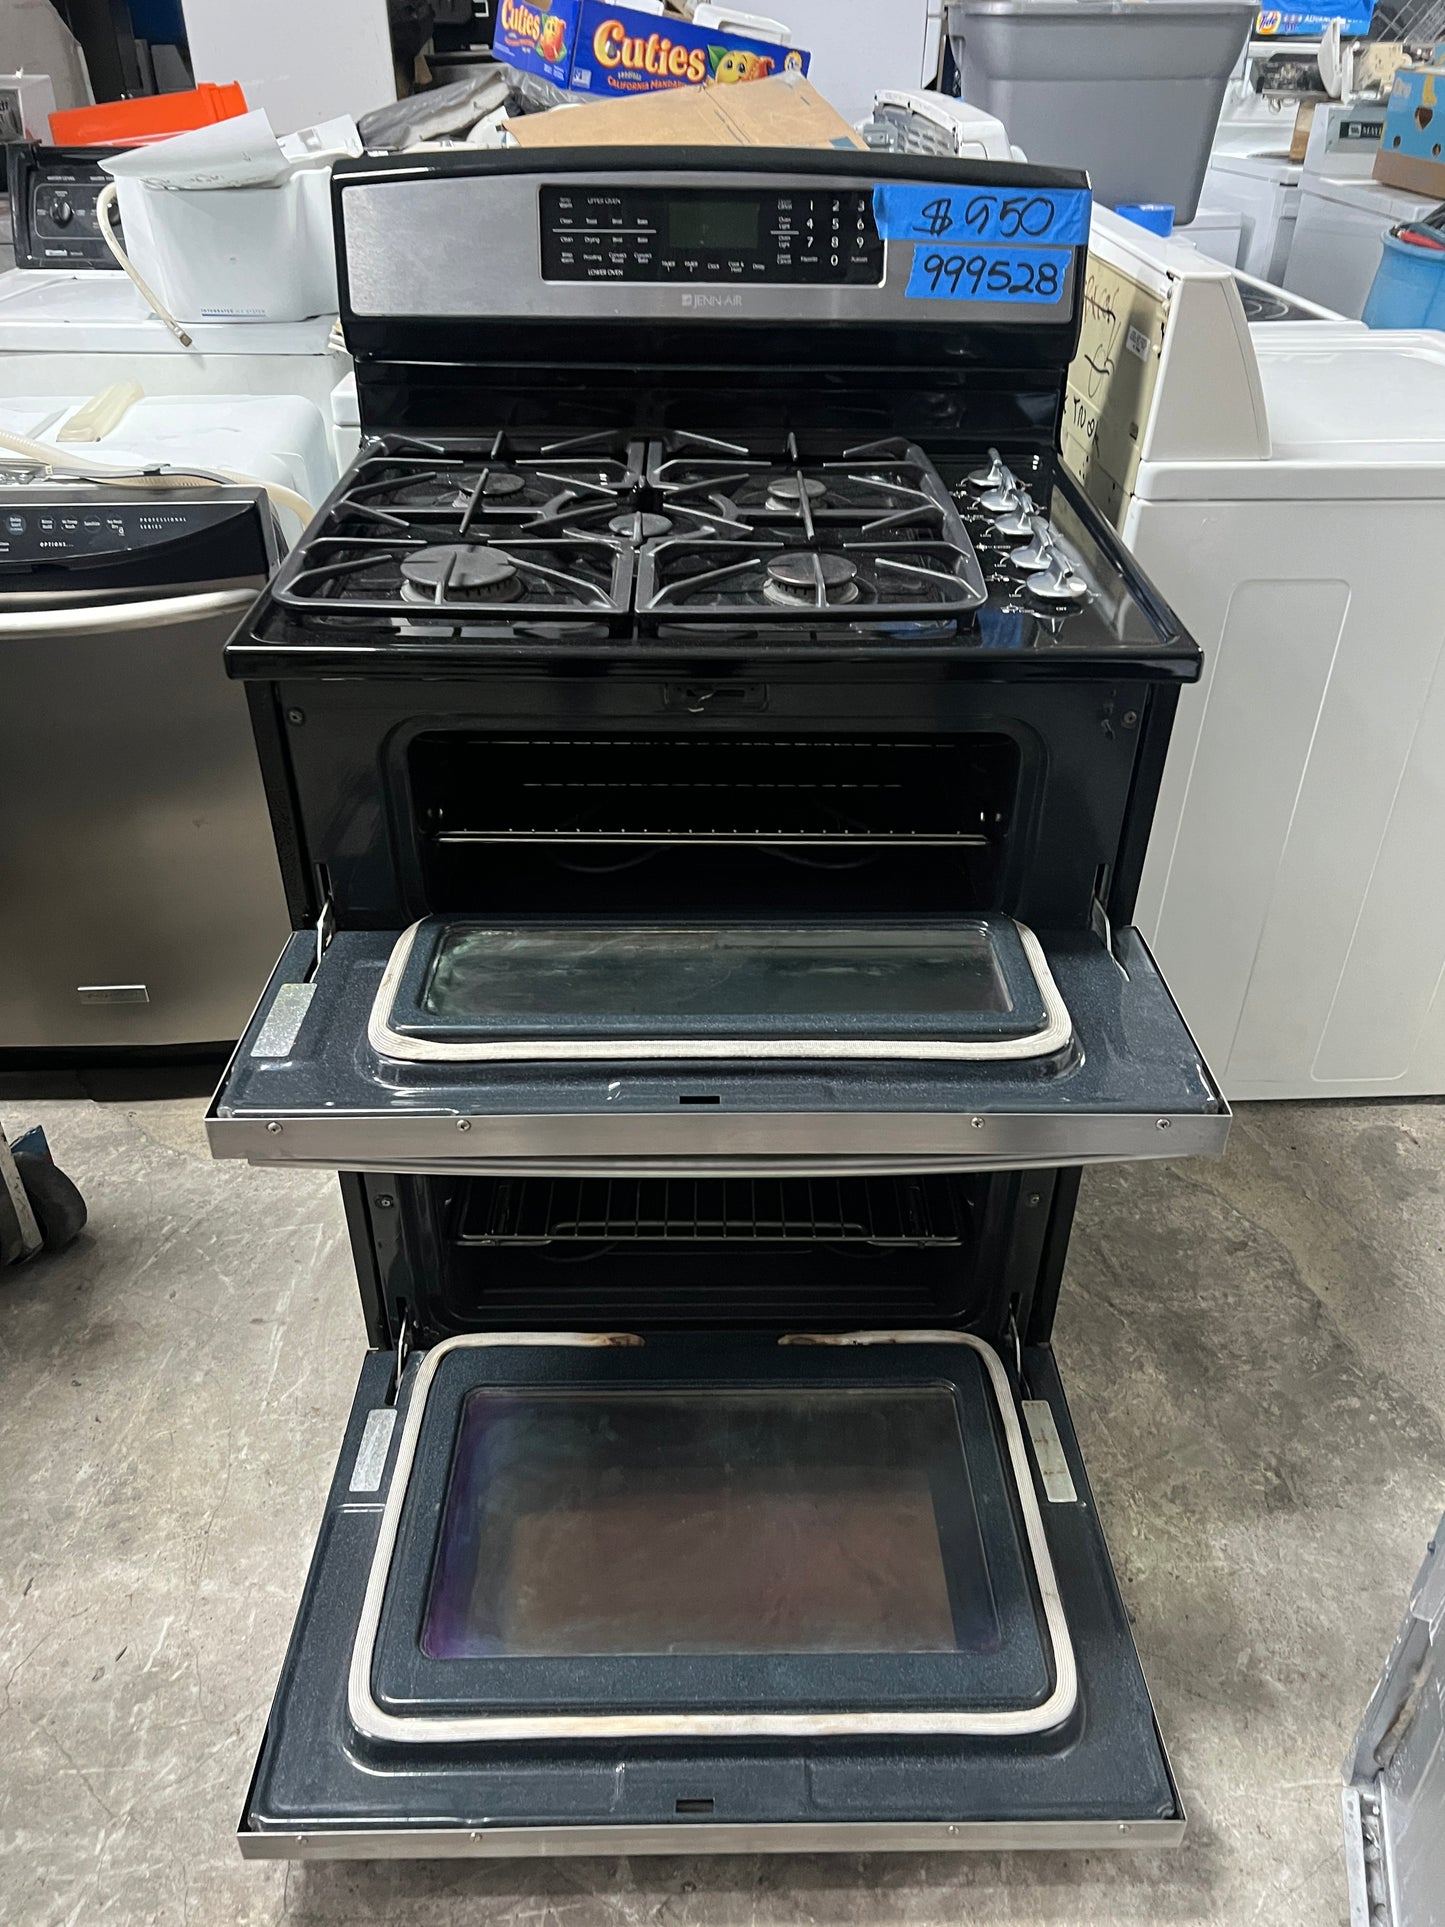 Jenn Air 30 Gas Range With 5 burners, Stainless Steel, 999528